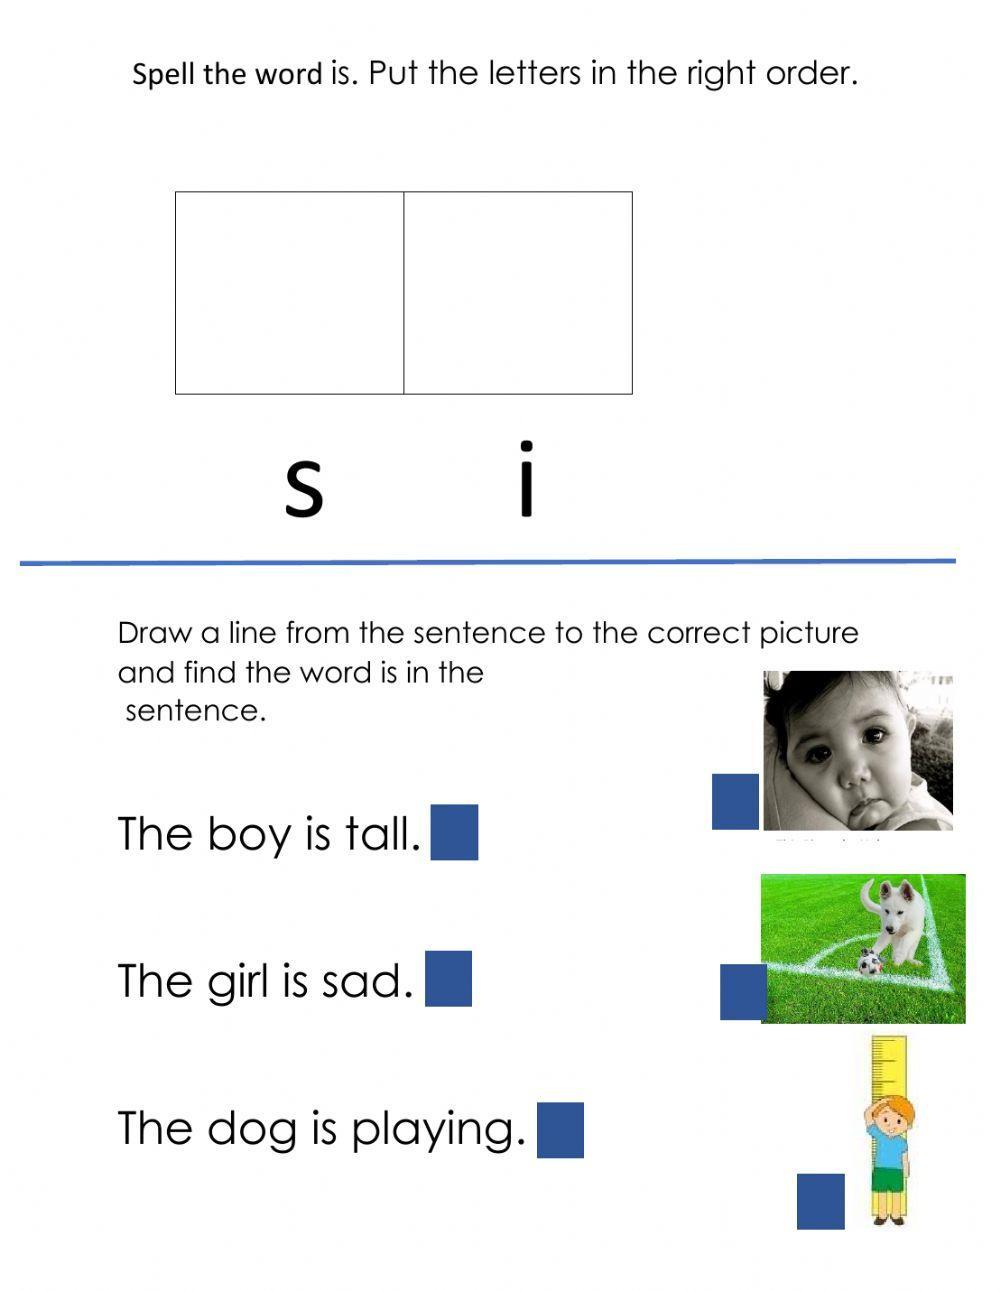 Sight word is